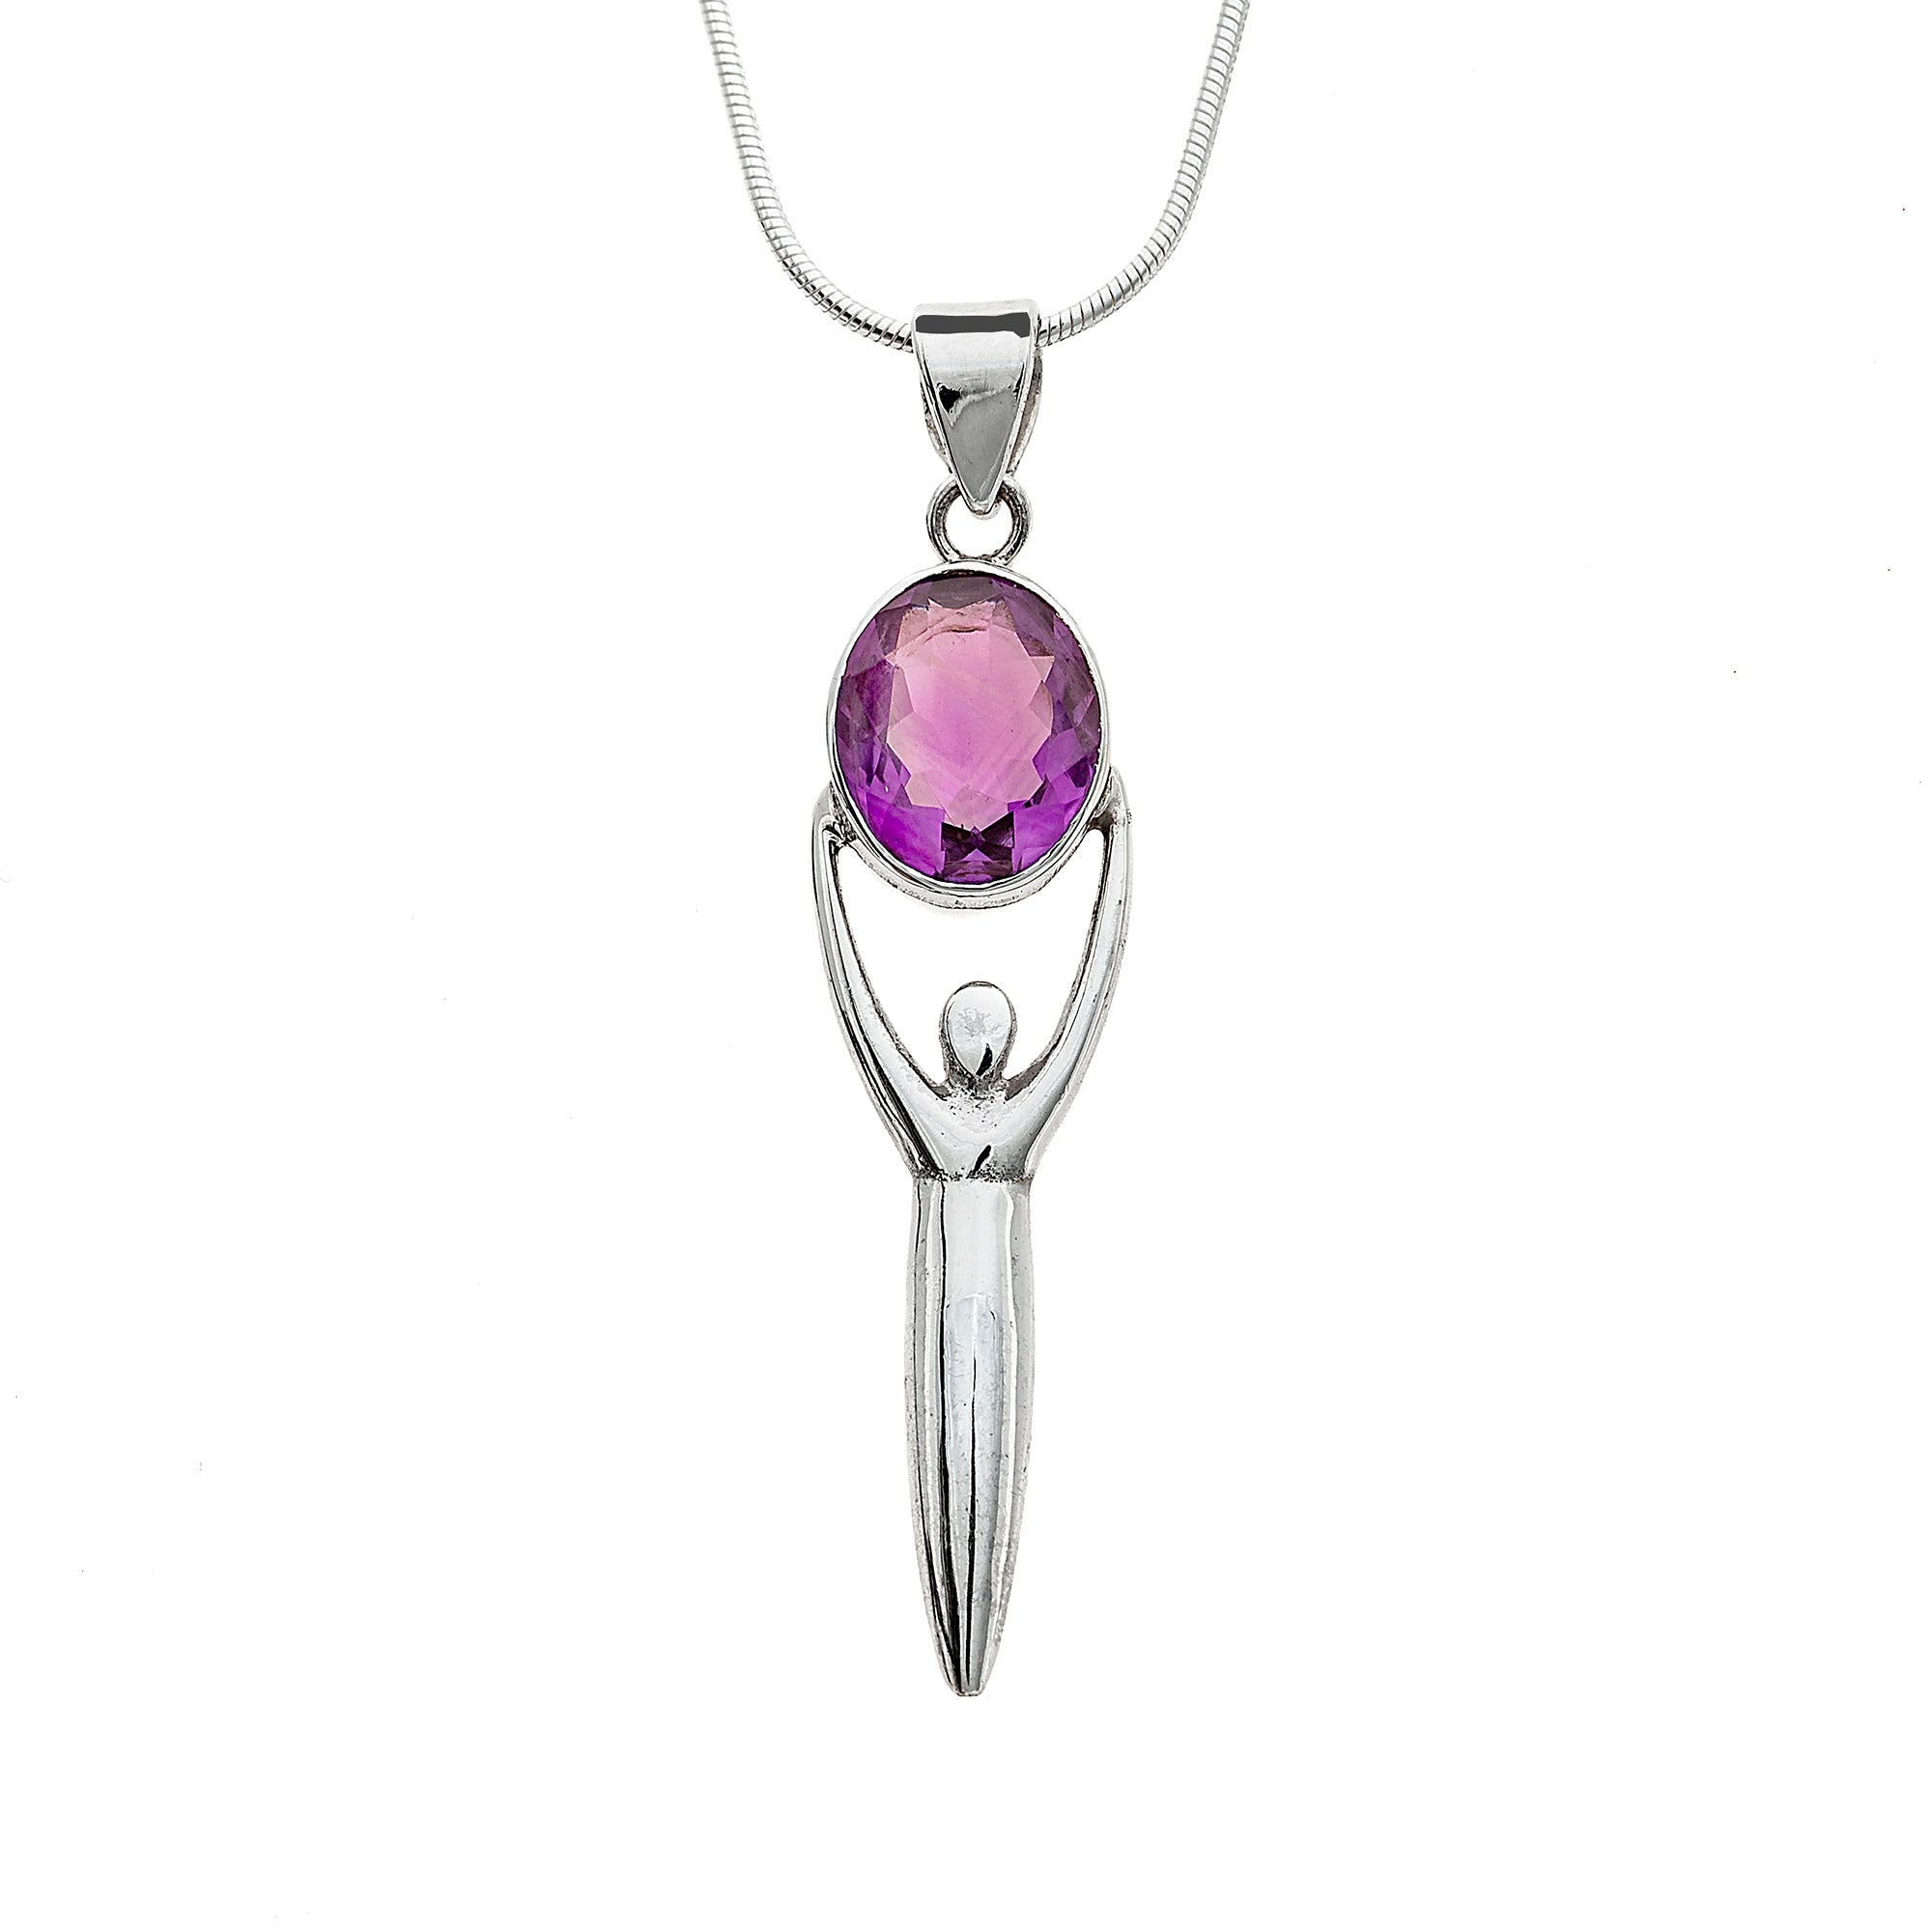 Goddess Pendant with facetted Amethyst